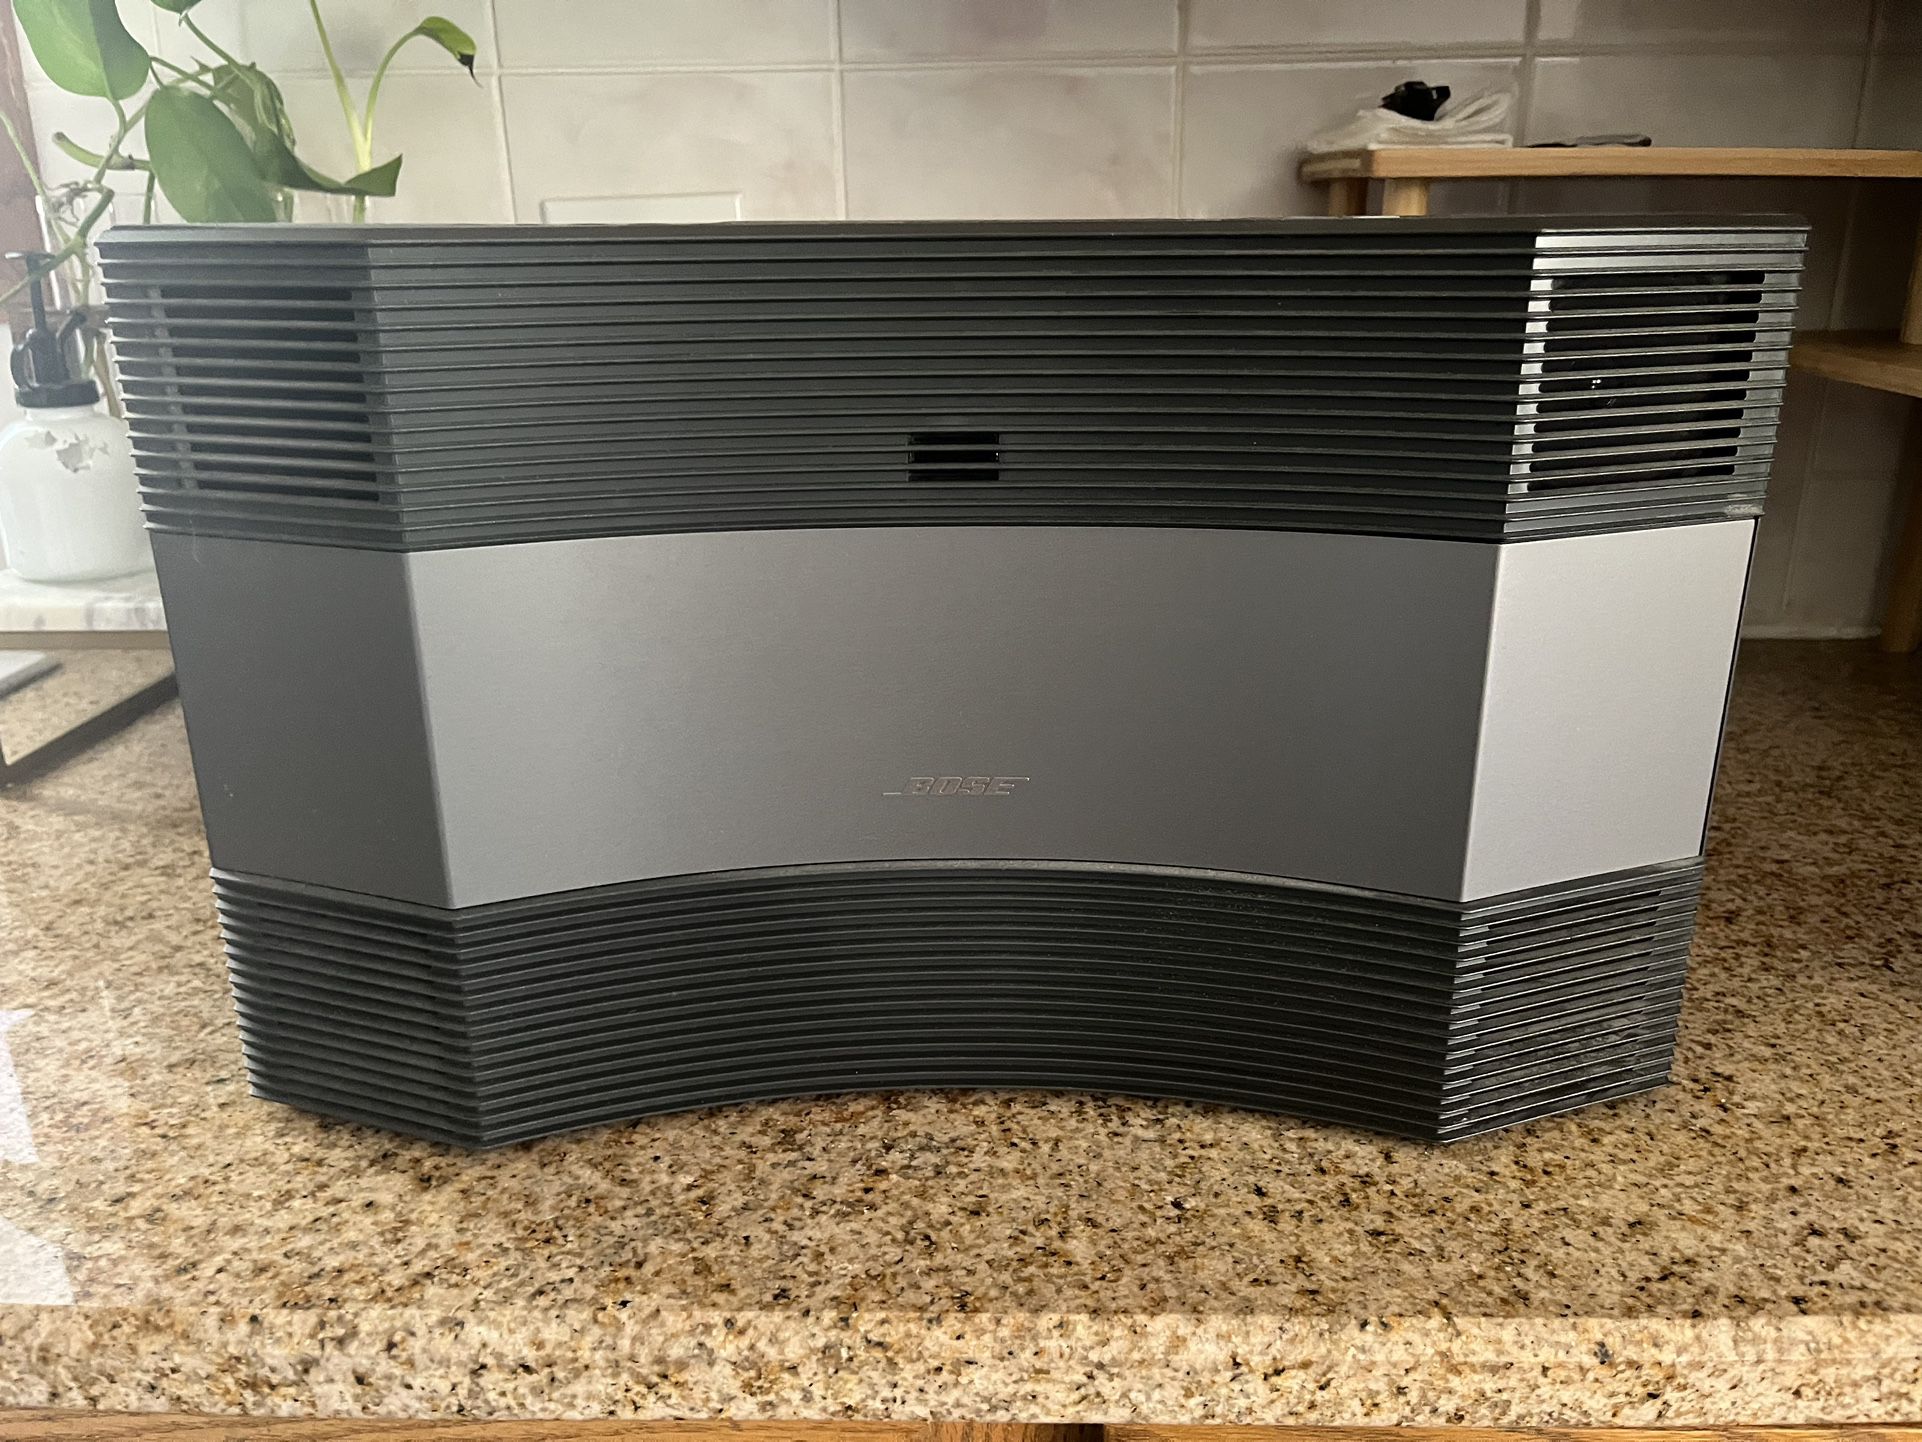 Bose Acoustic Wave CD Player